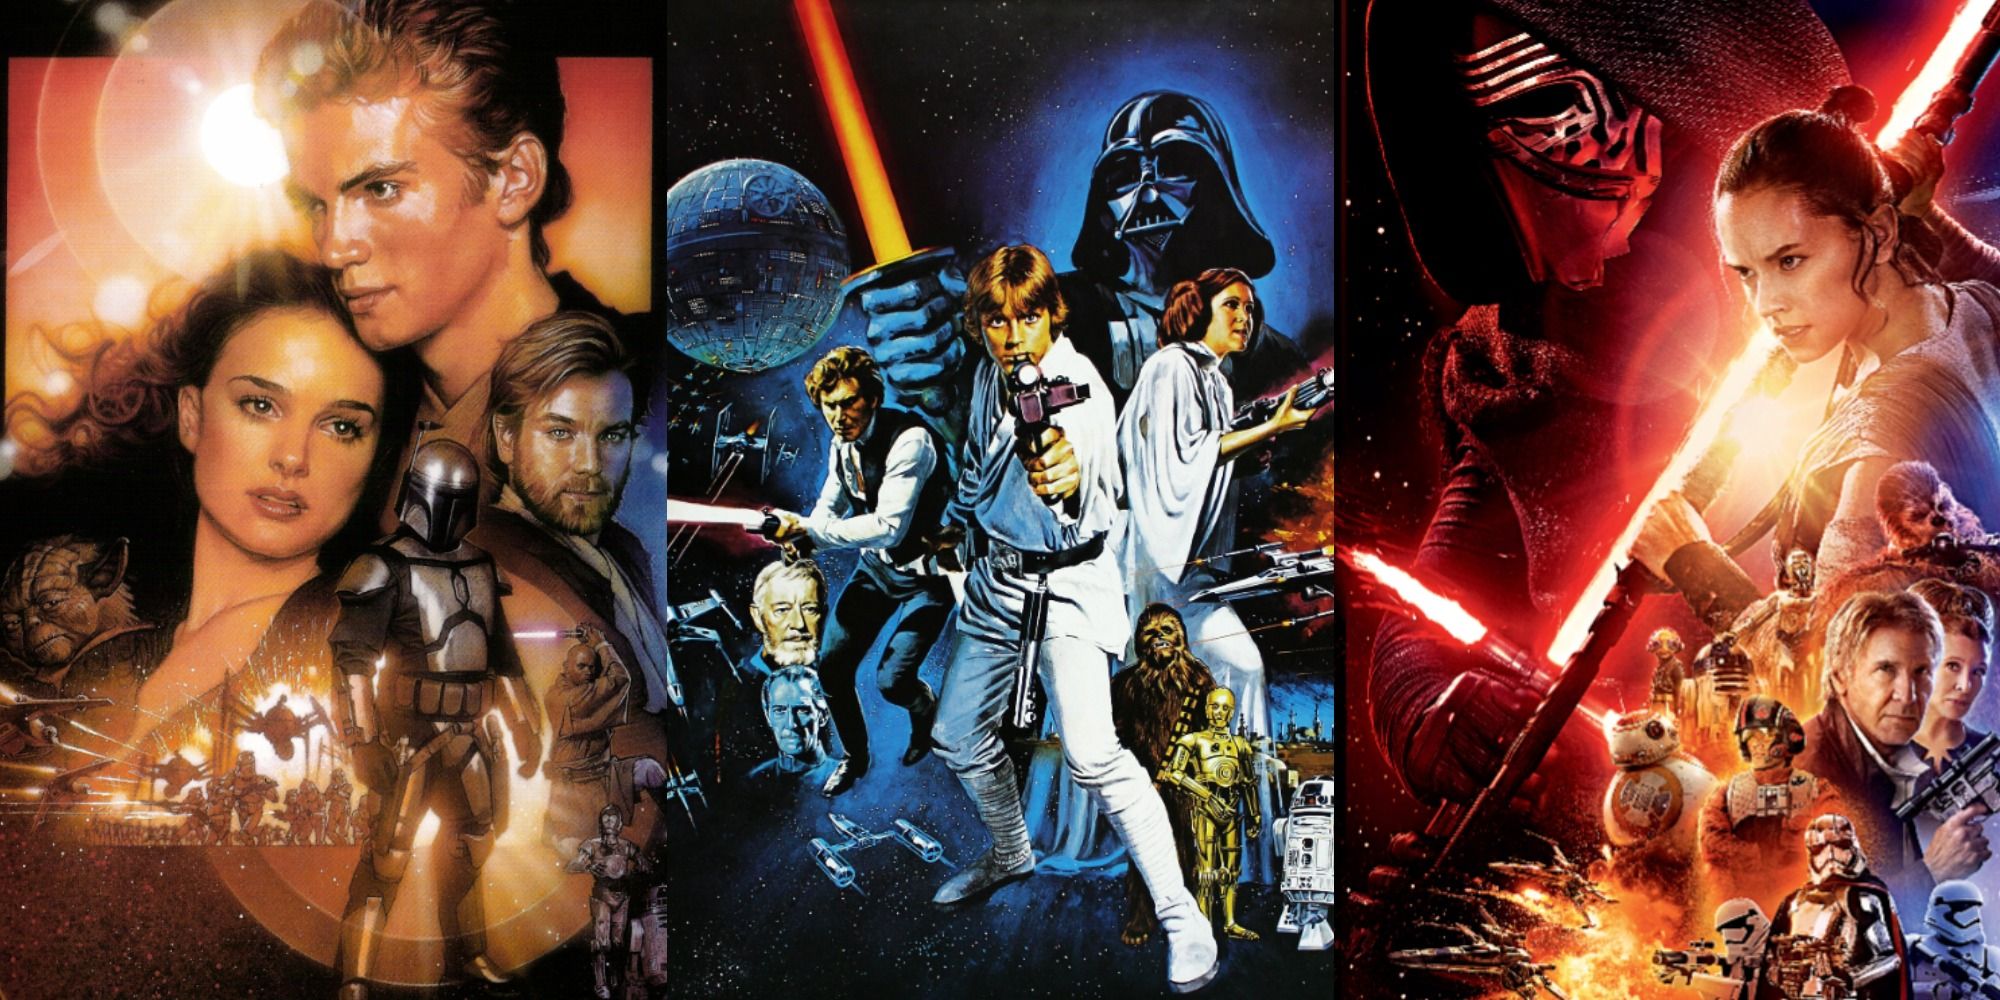 combined posters of 3 generations of Star Wars films the prequels, original trilogy, and sequels